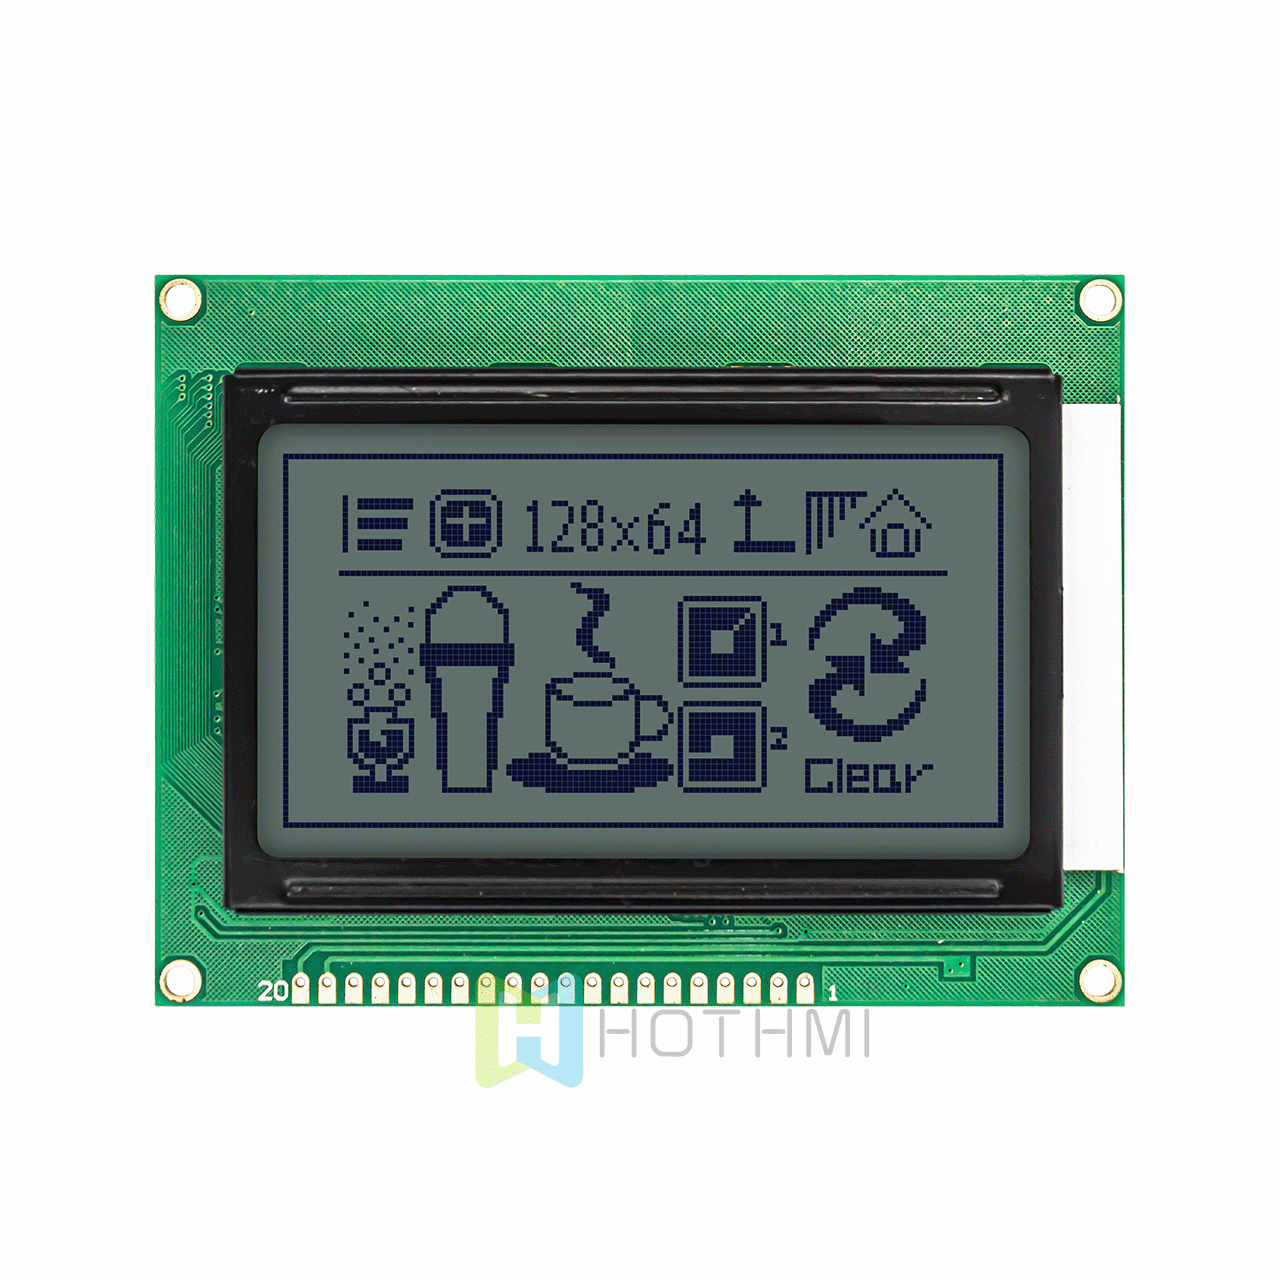 3.2-inch low-price 128x64 yellow-green backlight graphic LCD module | Graphic COB module | Supports 3.3V/5V at the same time